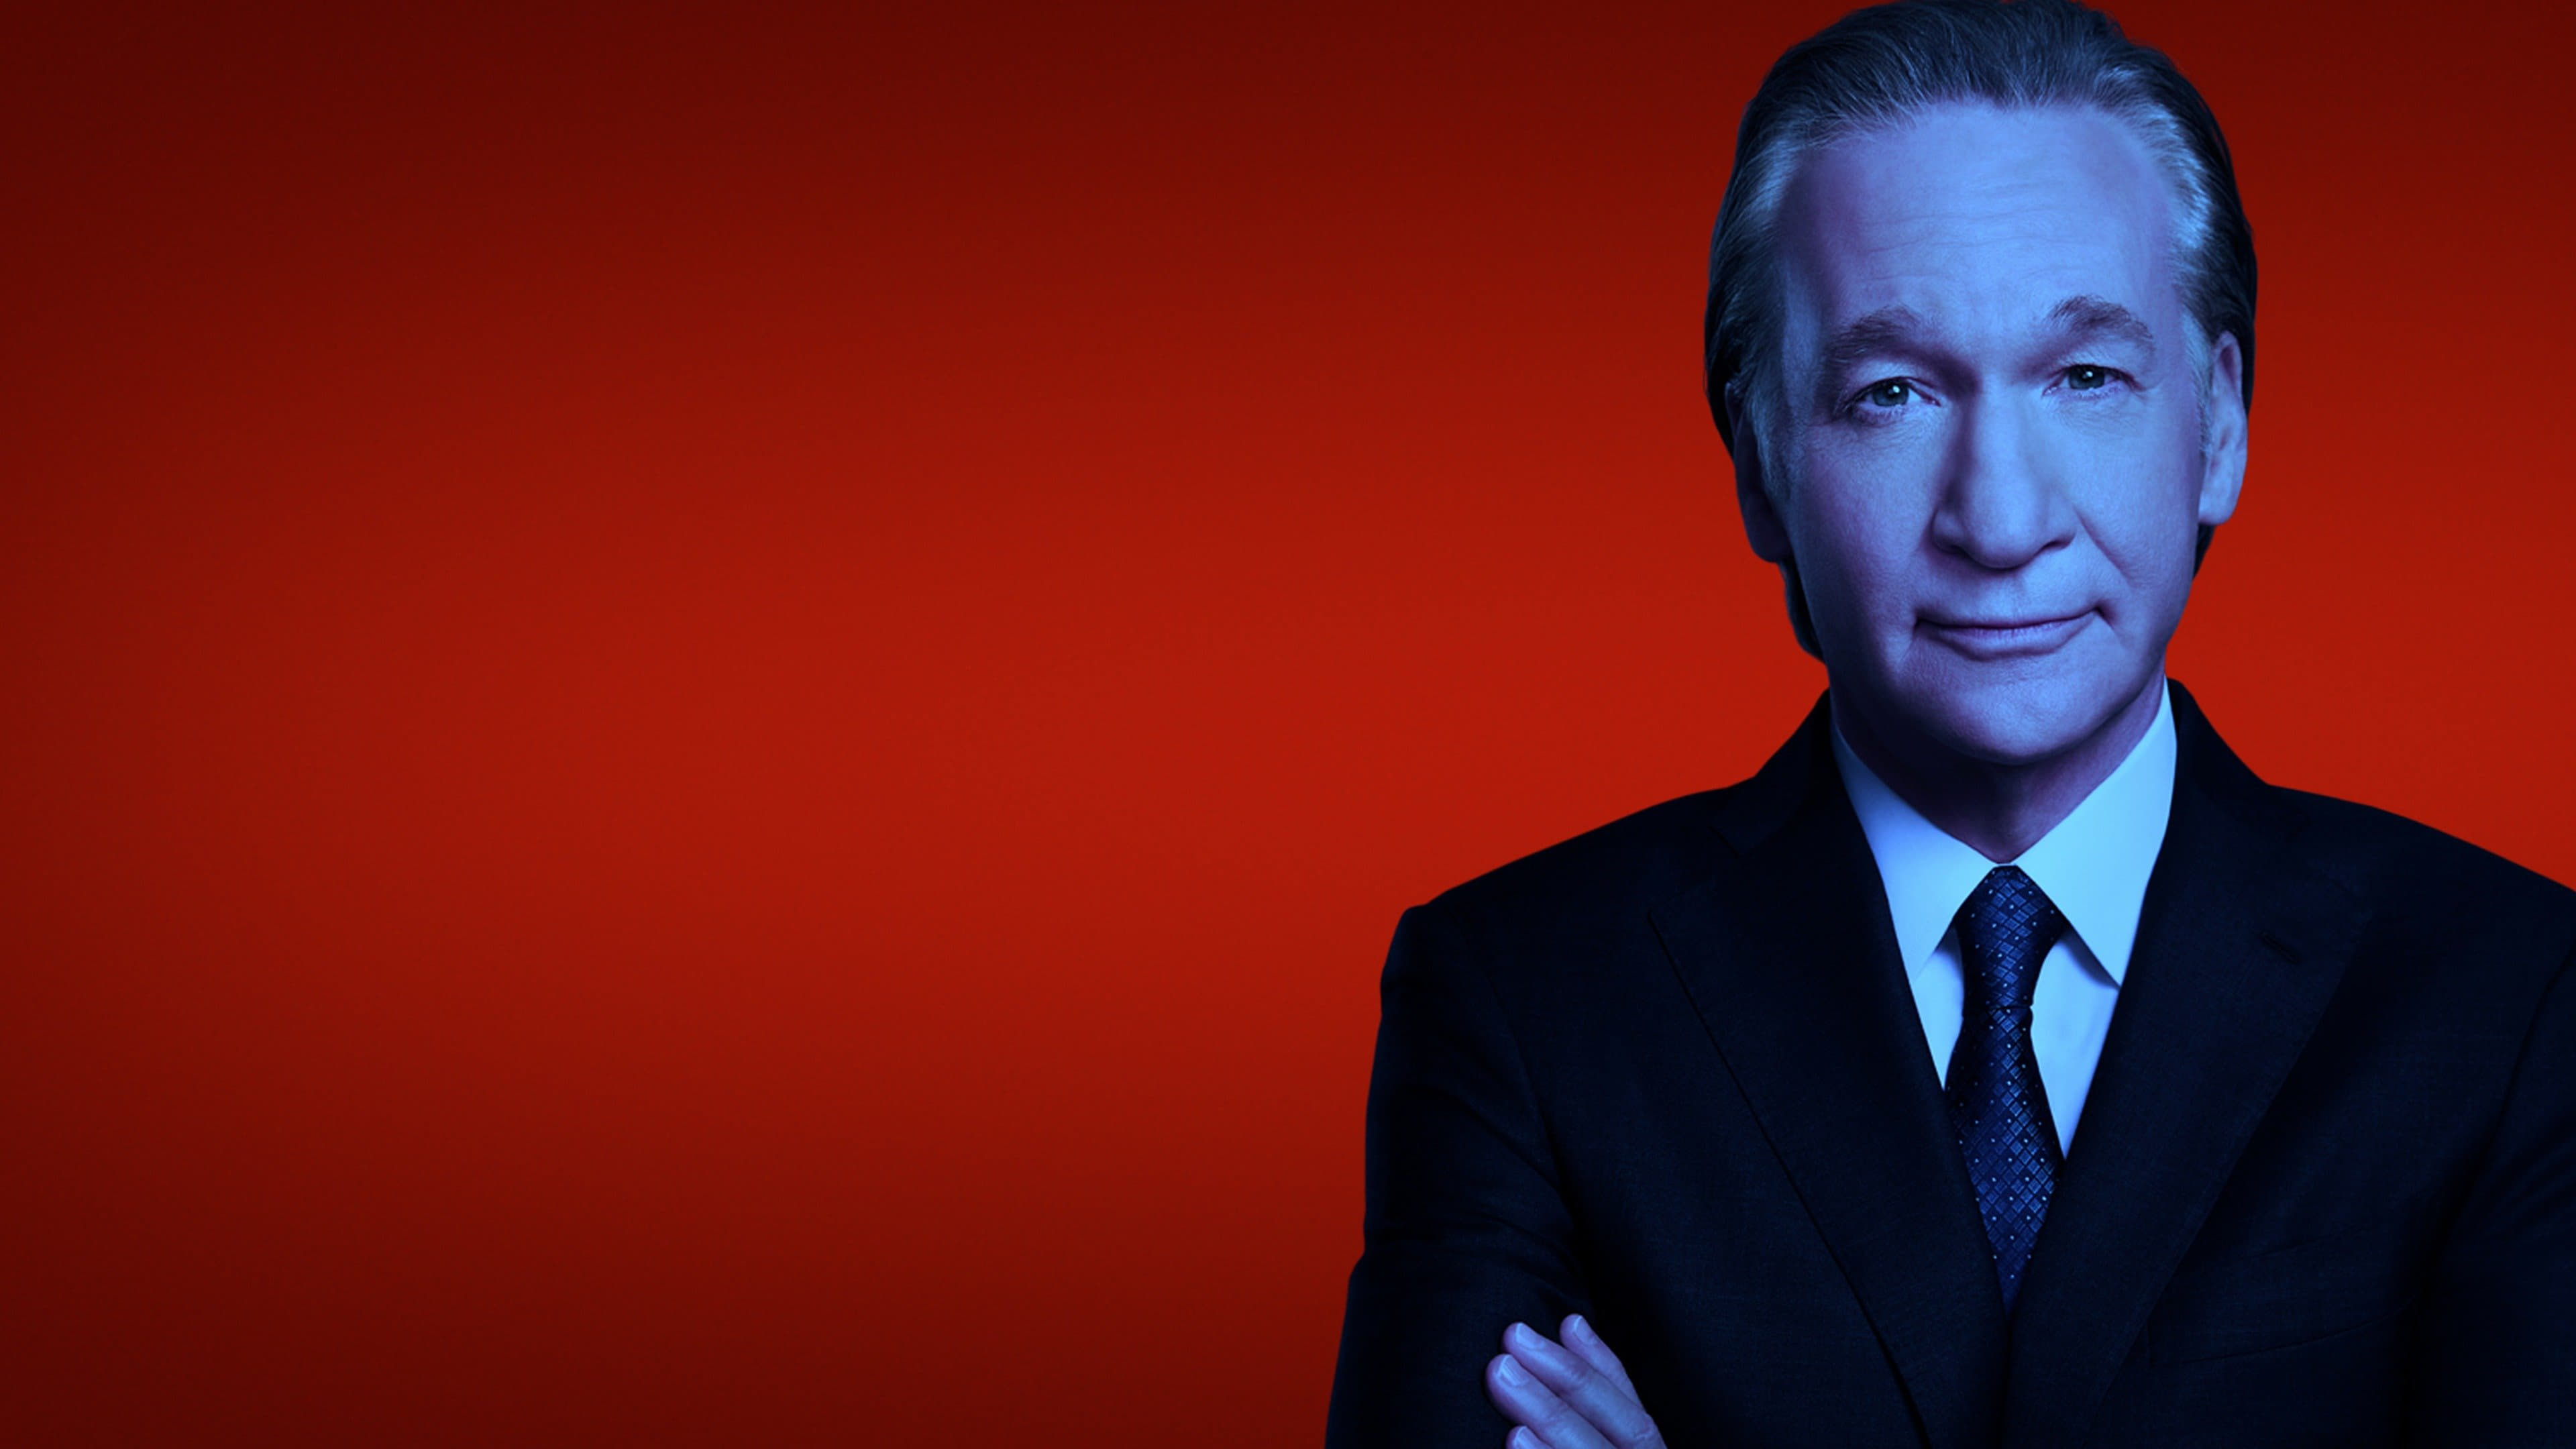 Real Time with Bill Maher - Season 22 Episode 8